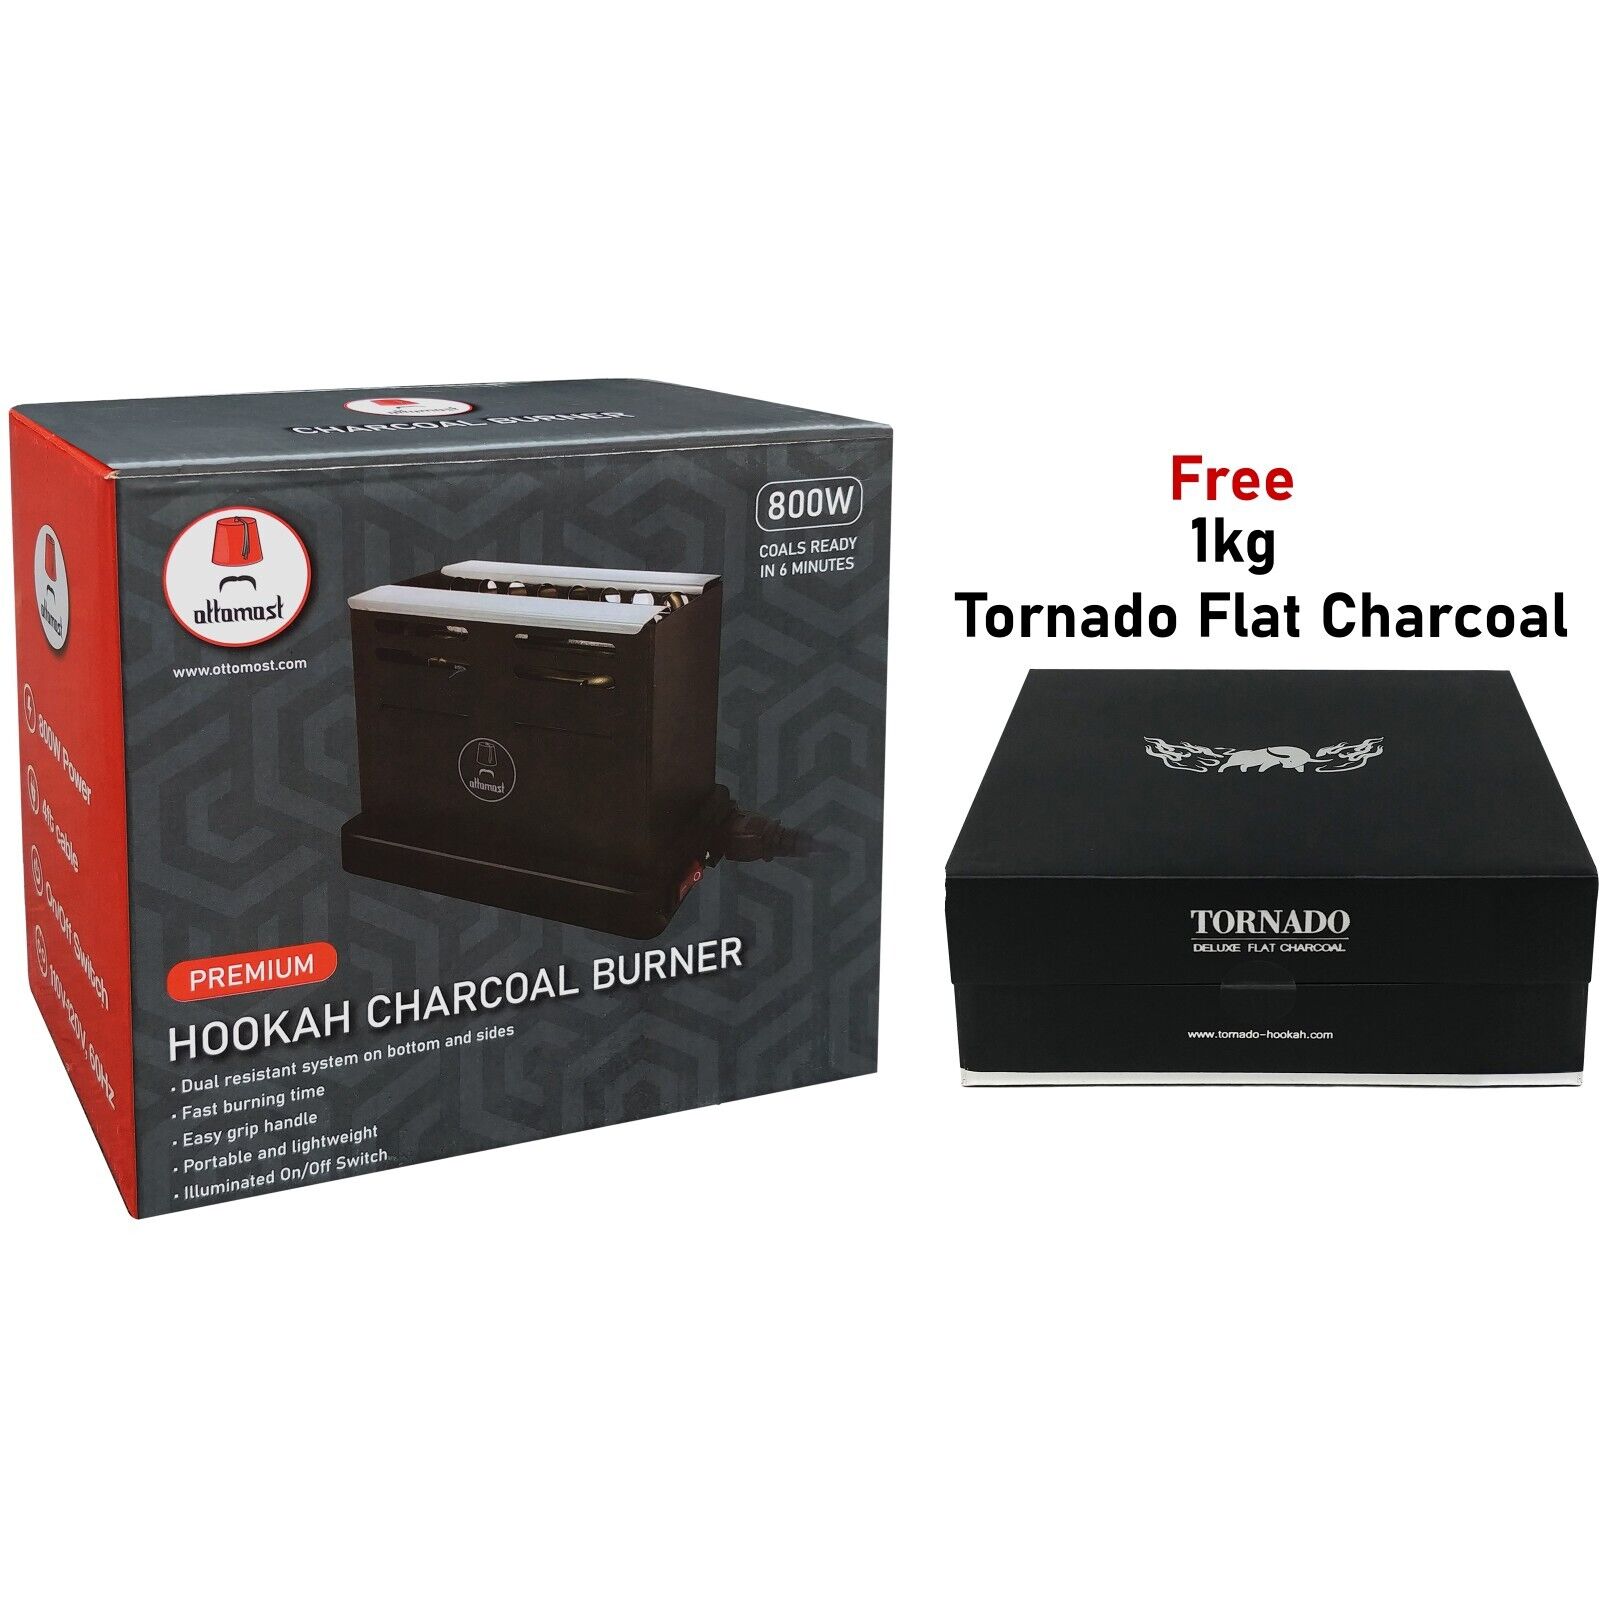 Hookah Charcoal Burner Fastest Burner in the Market 800w Comes with 1kg Charcoal